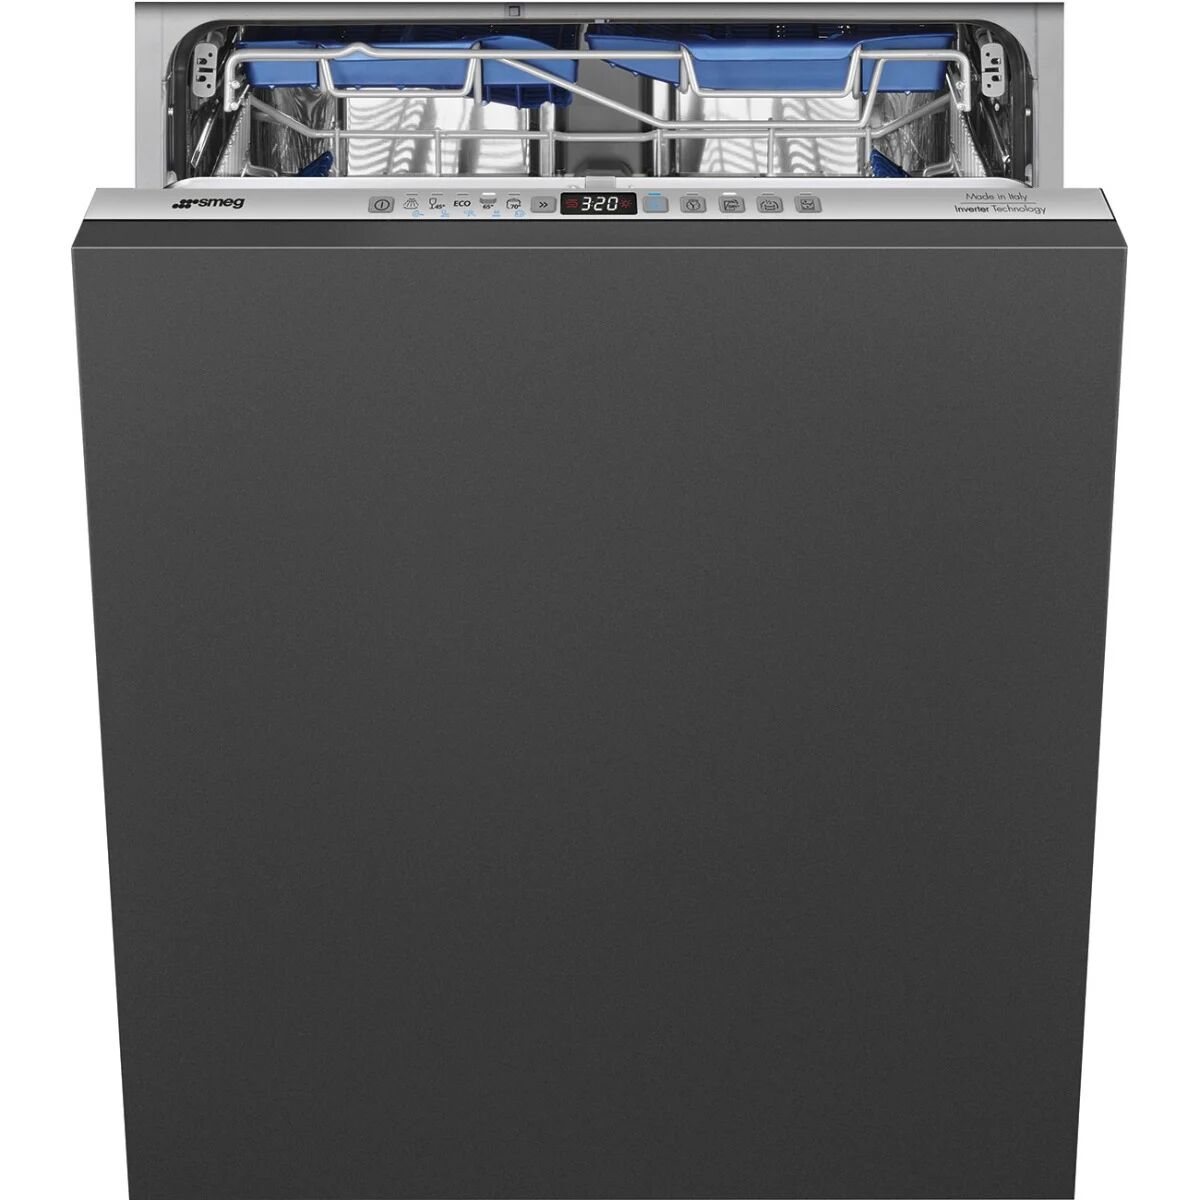 Smeg DI322BQLH 60cm Stainless Steel Integrated Dishwasher - Stainless Steel